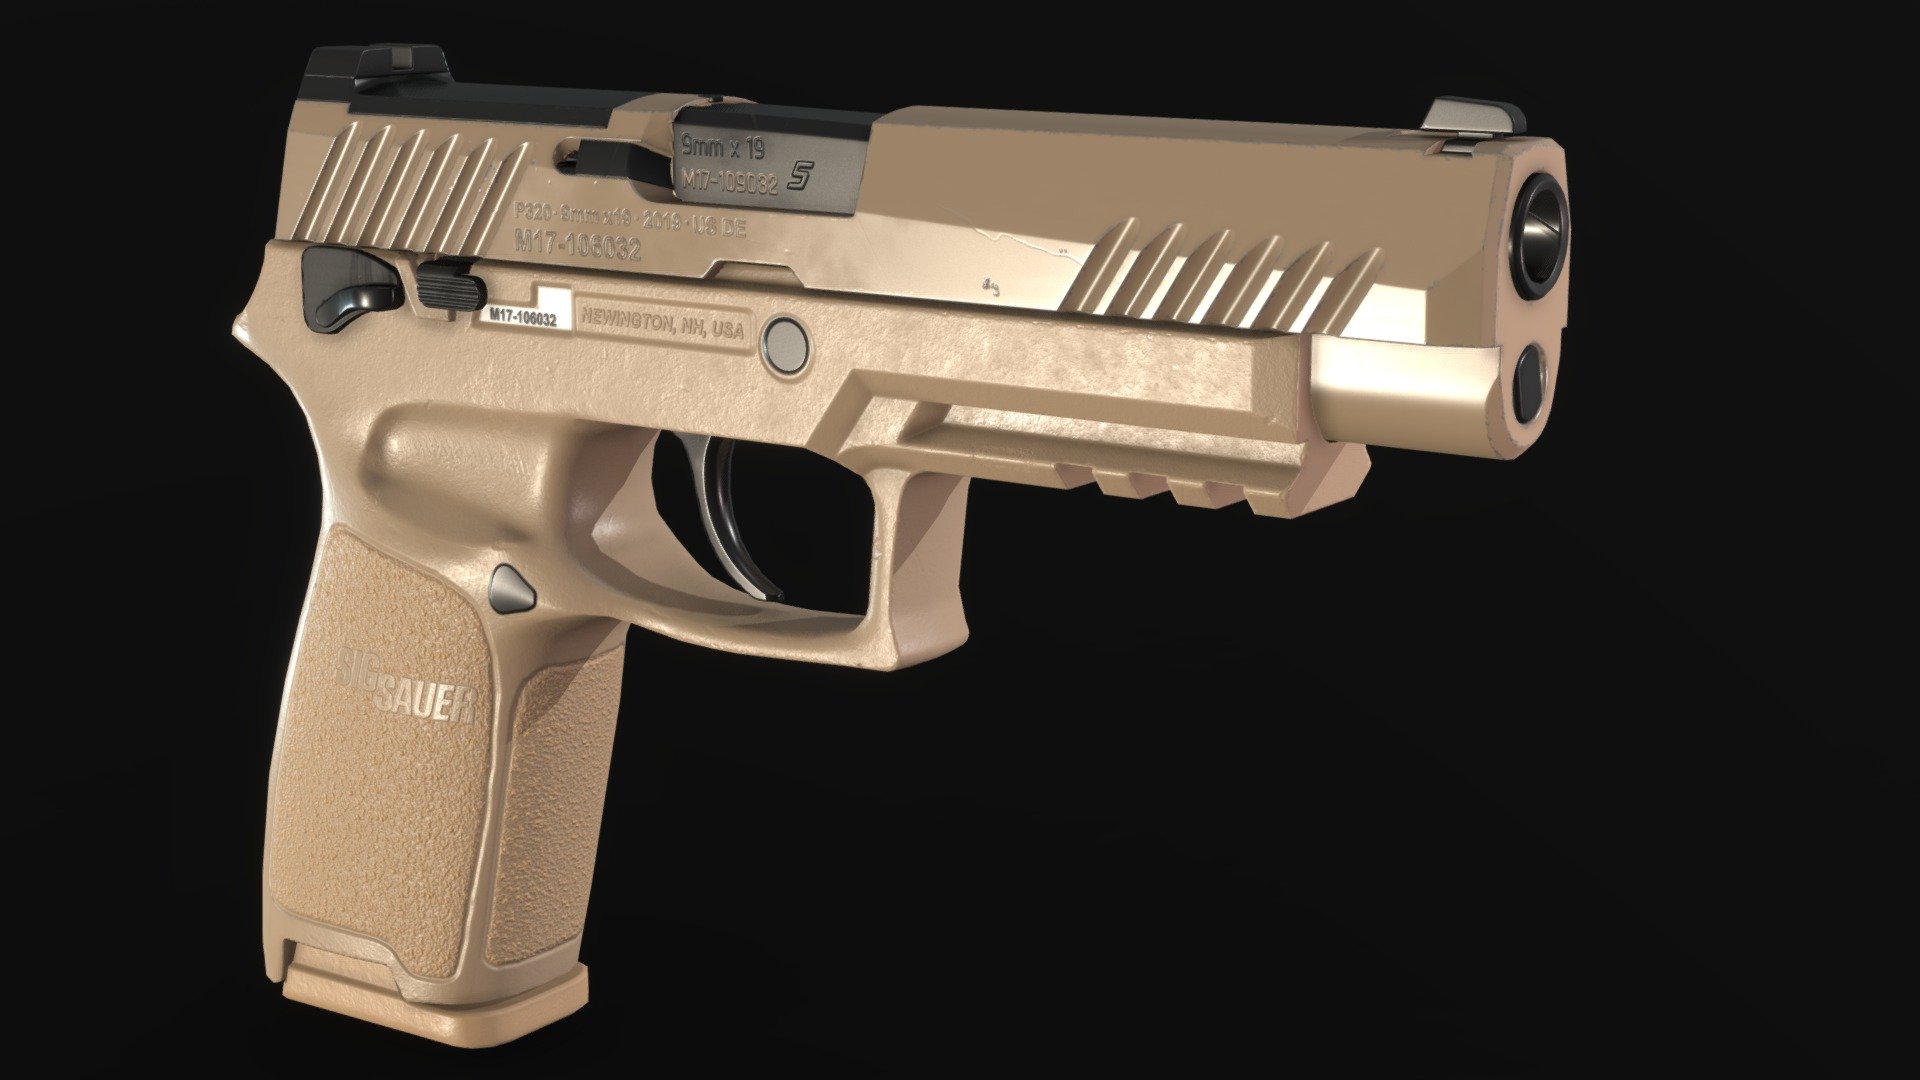 The SIG Sauer M17 and M18 are service pistols derived from the SIG Sauer P320 in use with the United States Armed Forces. On January 19, 2017, the United States Army announced that a customized version of SIG Sauer’s P320 had won the Army's XM17 Modular Handgun System competition. The full-sized model was designated the M17, and the shorter length carry model, the M18. The guns have subsequently been adopted by the United States Army, Navy, Marine Corps, Air Force, and Space Force. The pistol replaces the Beretta M9, as well as several other handguns across the services. There are two color variants, coyote brown and black, for both the M17 and M18, though almost all have been produced in brown.
Modeled in Blender 2.9
Textured in Substance Painter
Rendered in Marmoset Toolbag 4 - Sig Sauer P320/M17 - Buy Royalty Free 3D model by SeveN (@SeveN-Models) 3d model